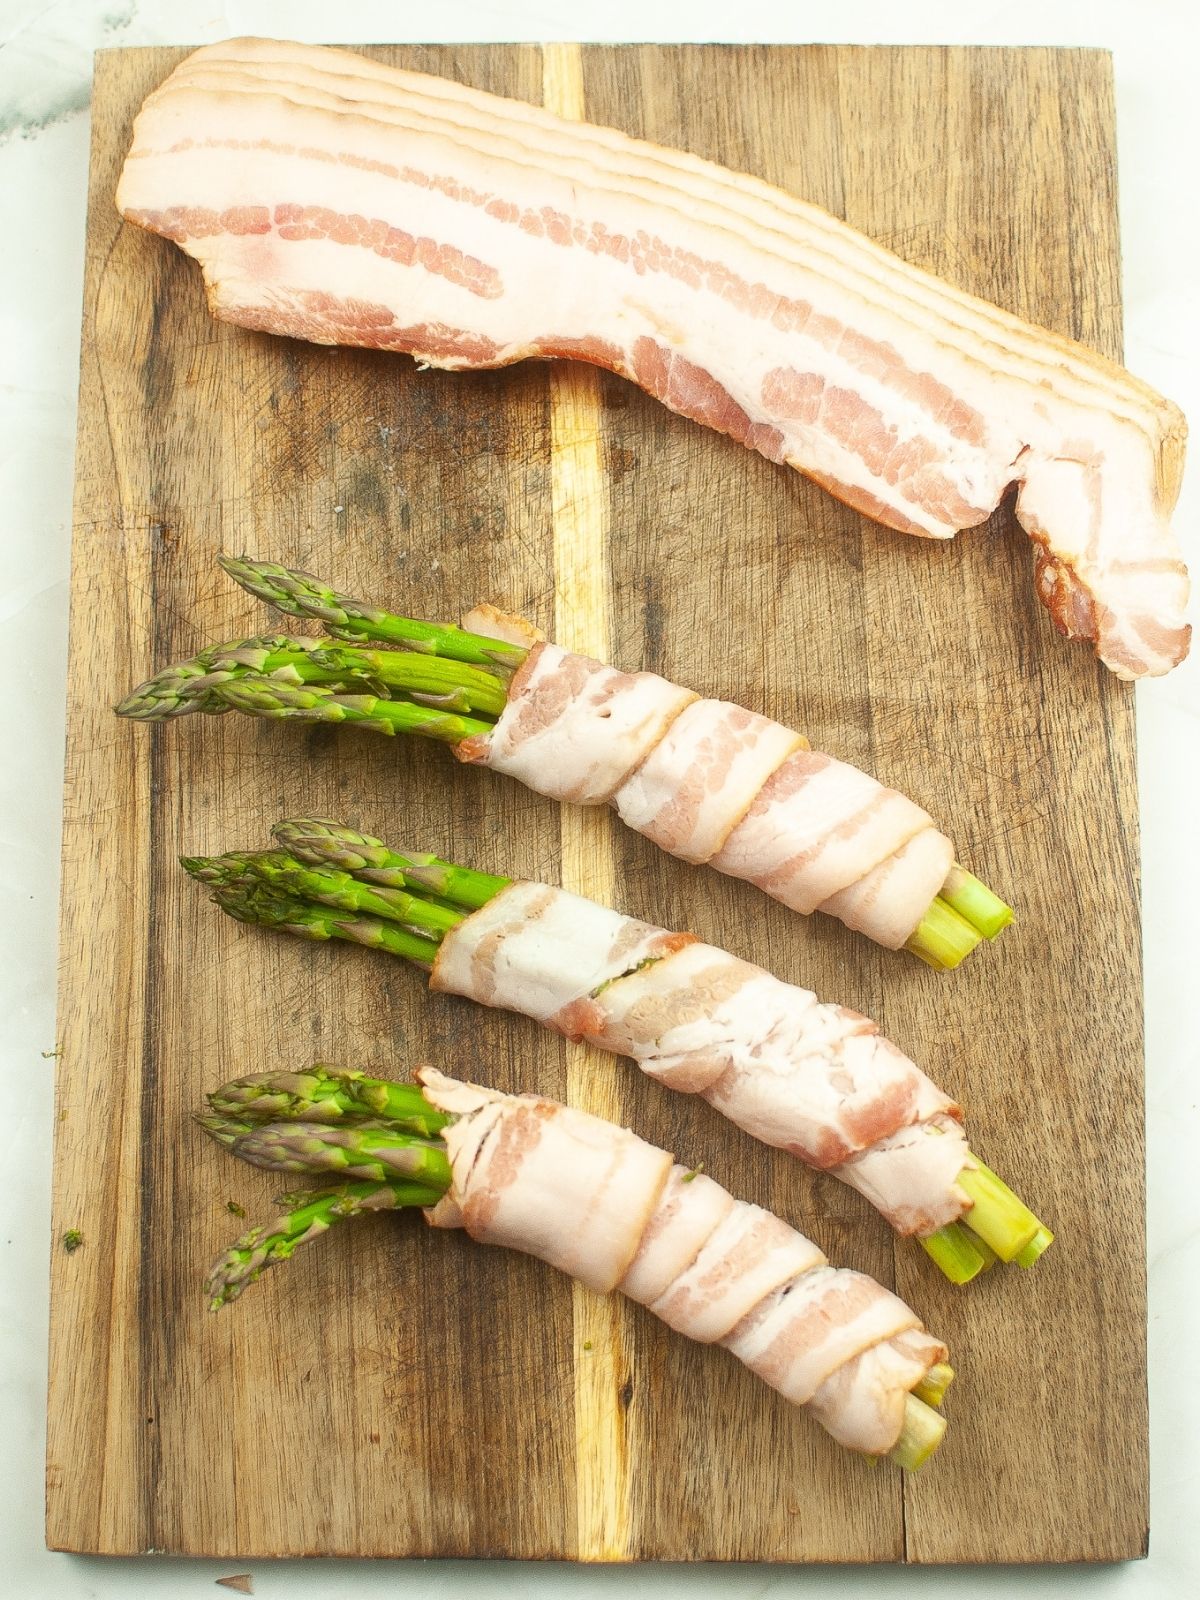 3 bunches of asparagus wrapped in raw bacon on cutting board.